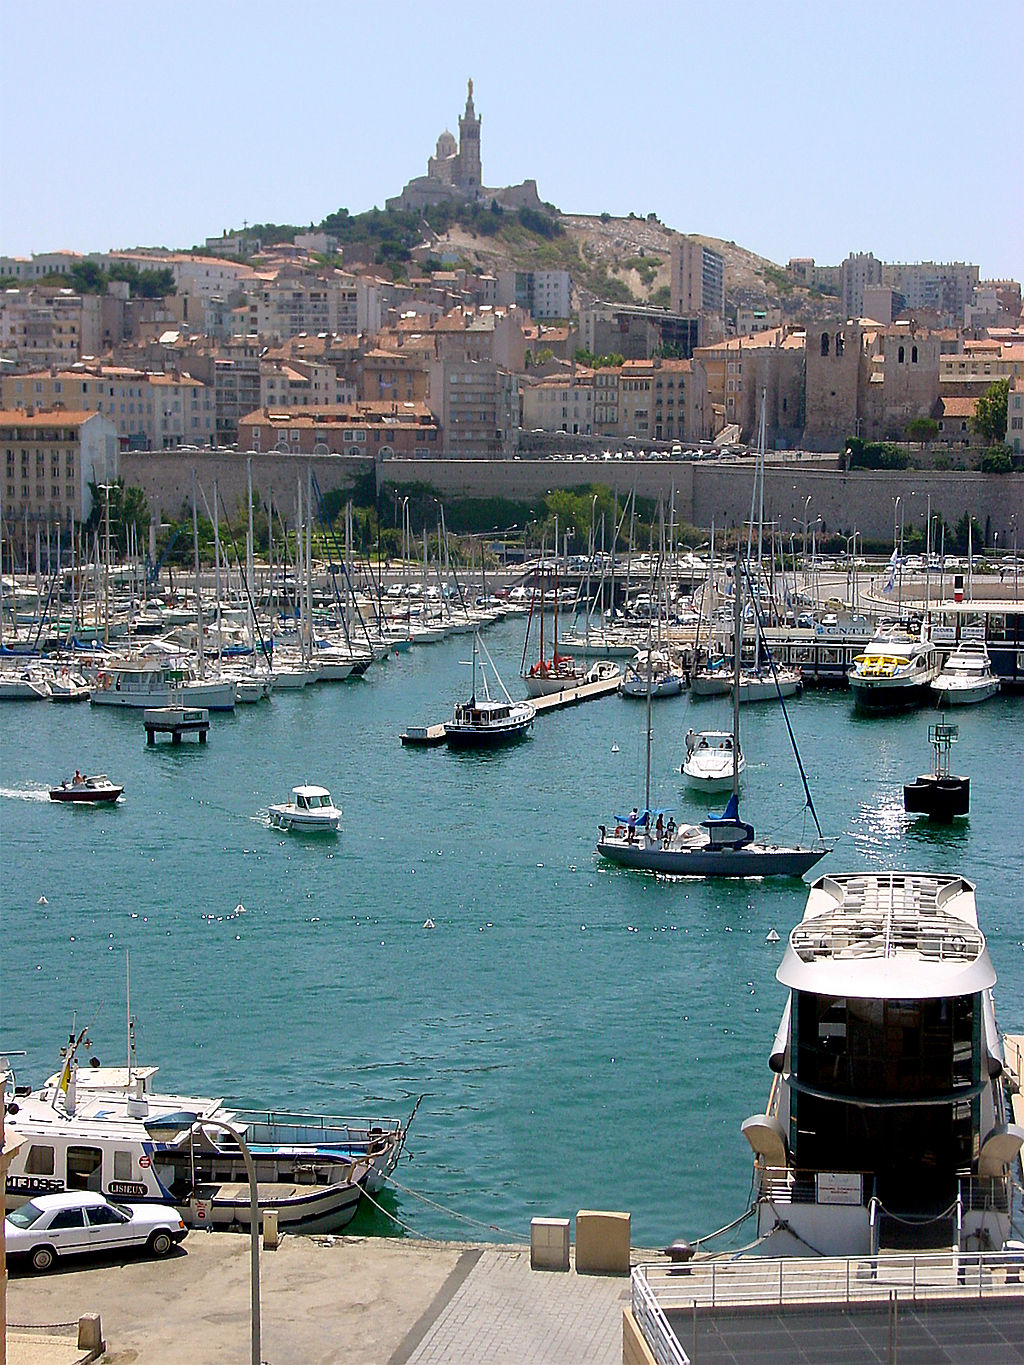 The Harbour of Marseille. (Photo by Thomas Steiner / Source: Wikimedia Commons)